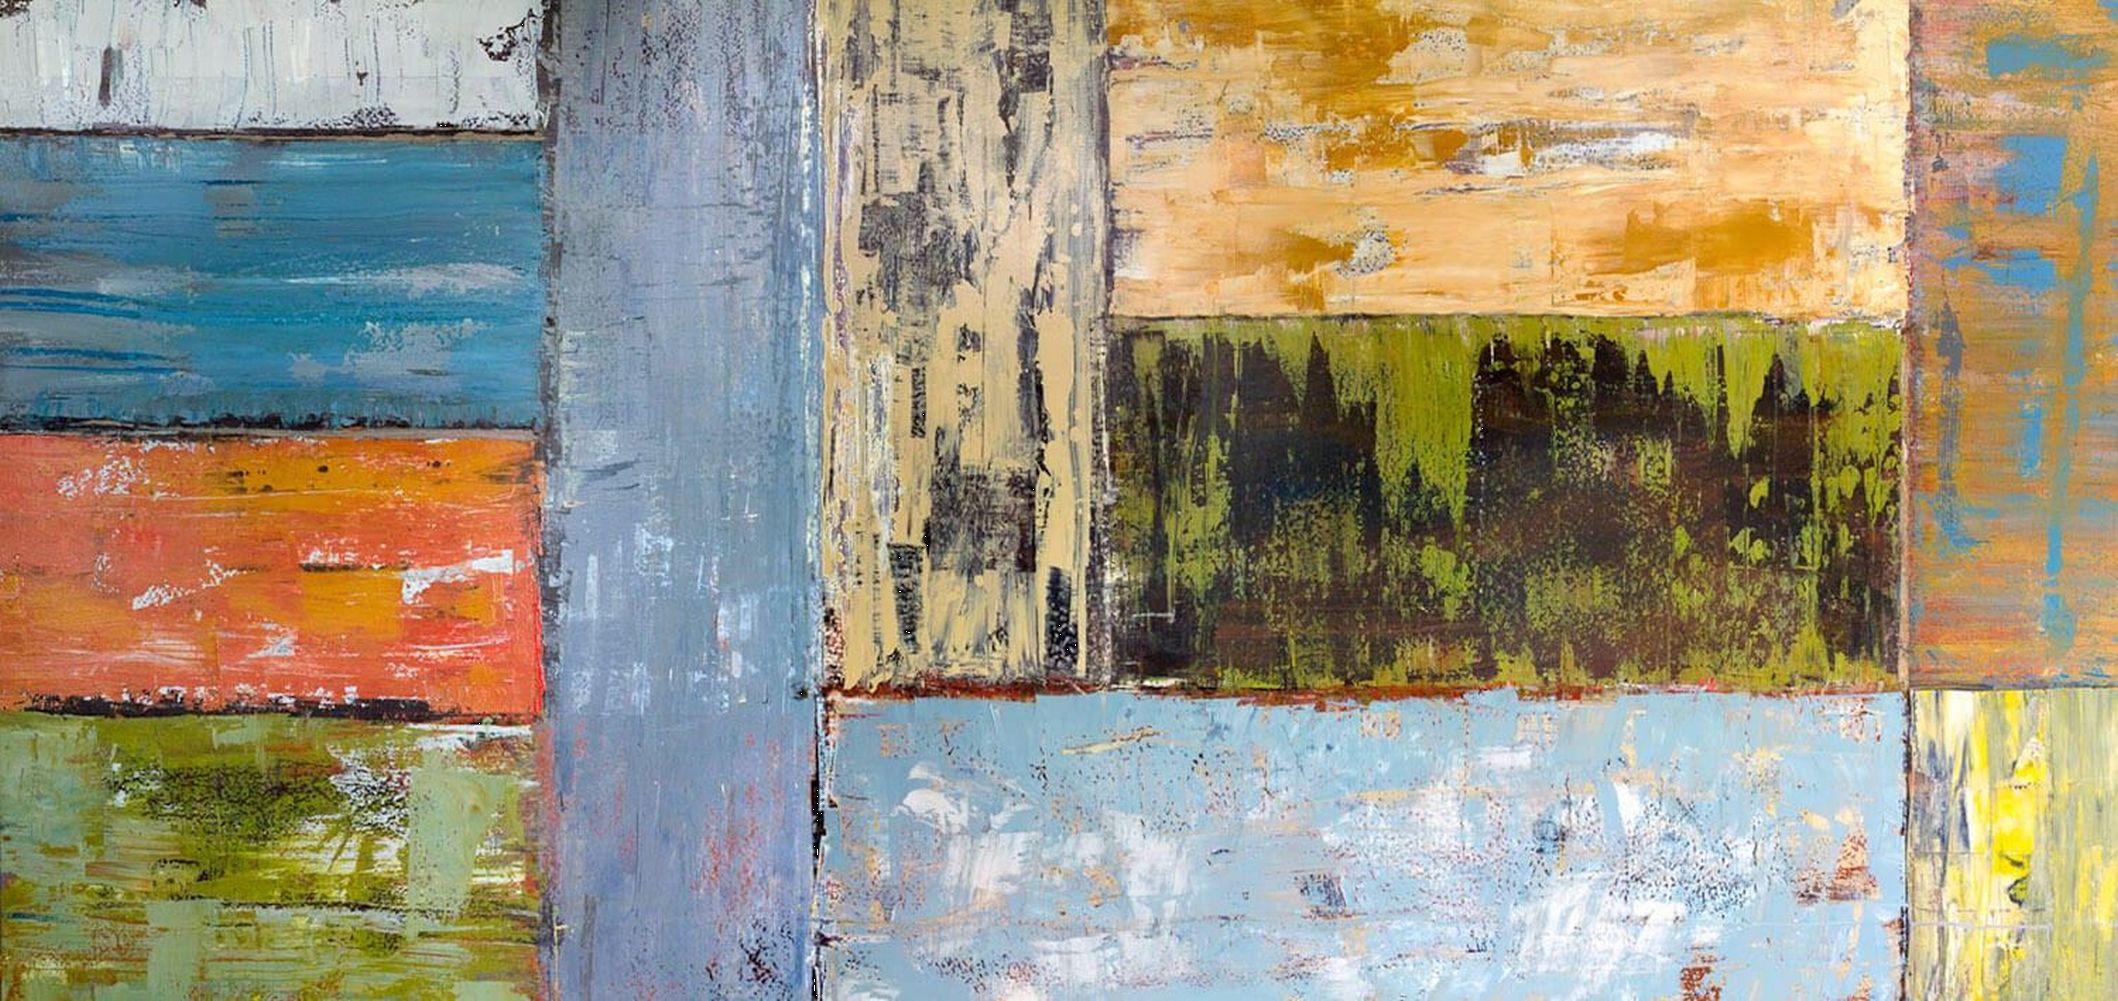 John Beard Abstract Painting - SPACES, Contemporary Blocks Fine Art on Giclee Canvas: 72"H x 36"W